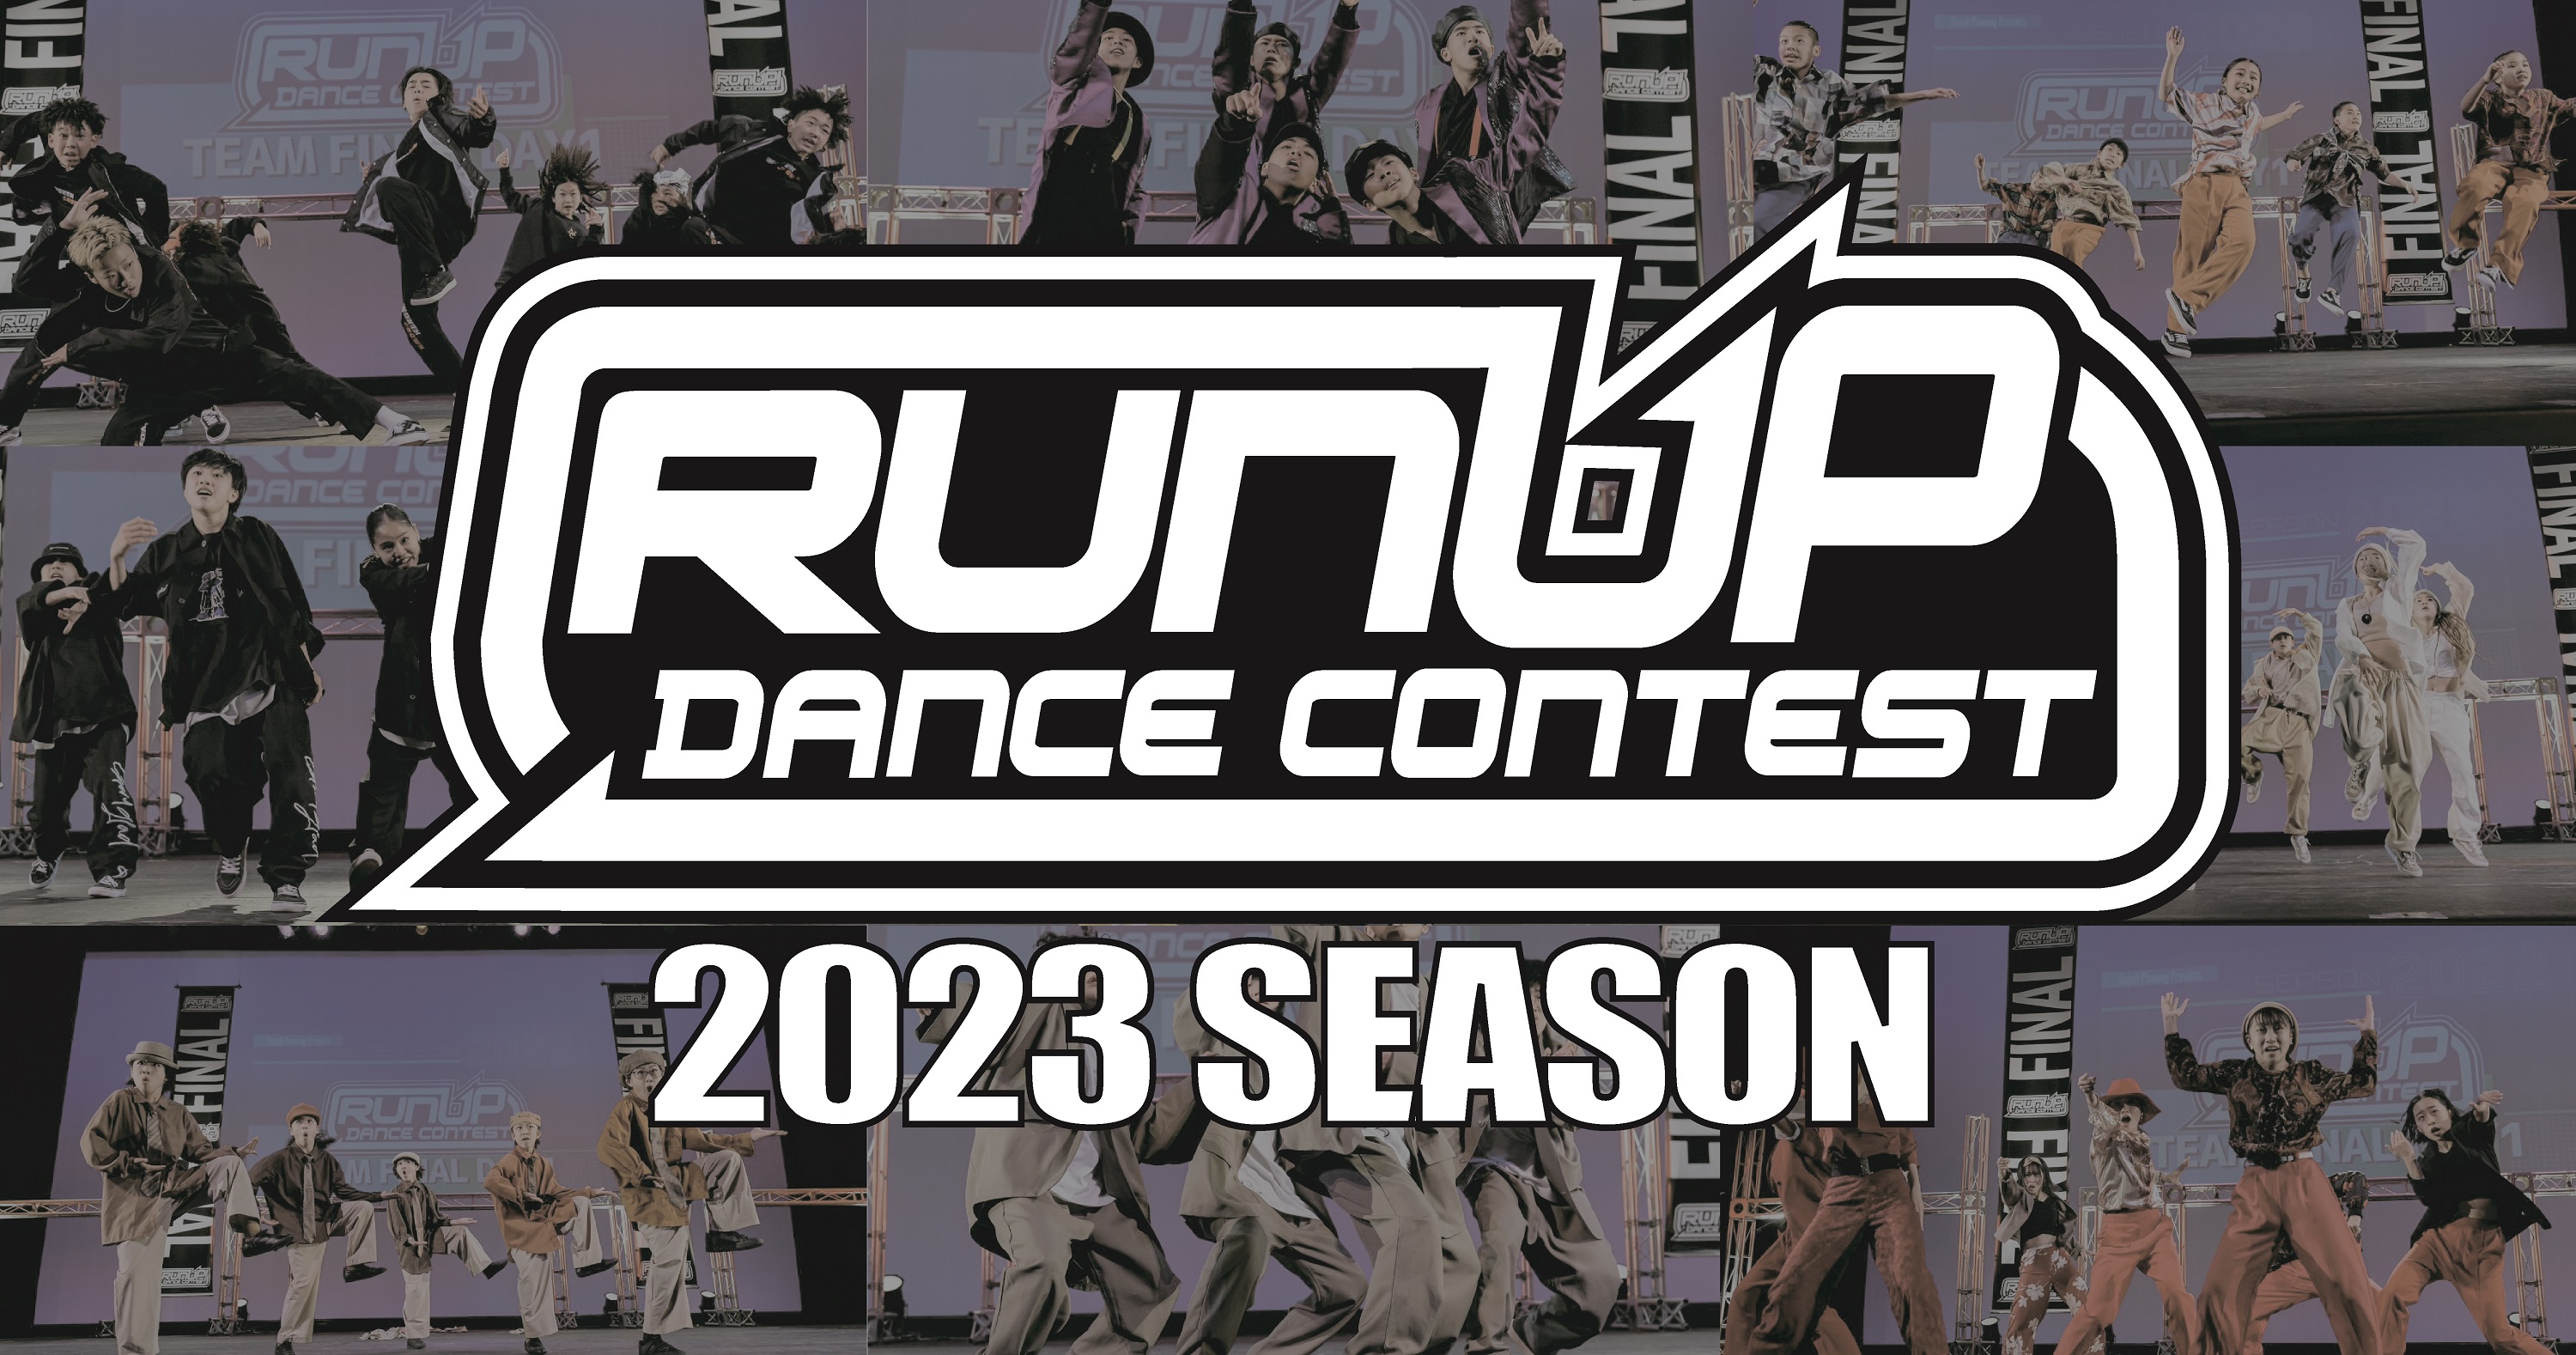 RUNUP 2023シーズン サムネイル 中